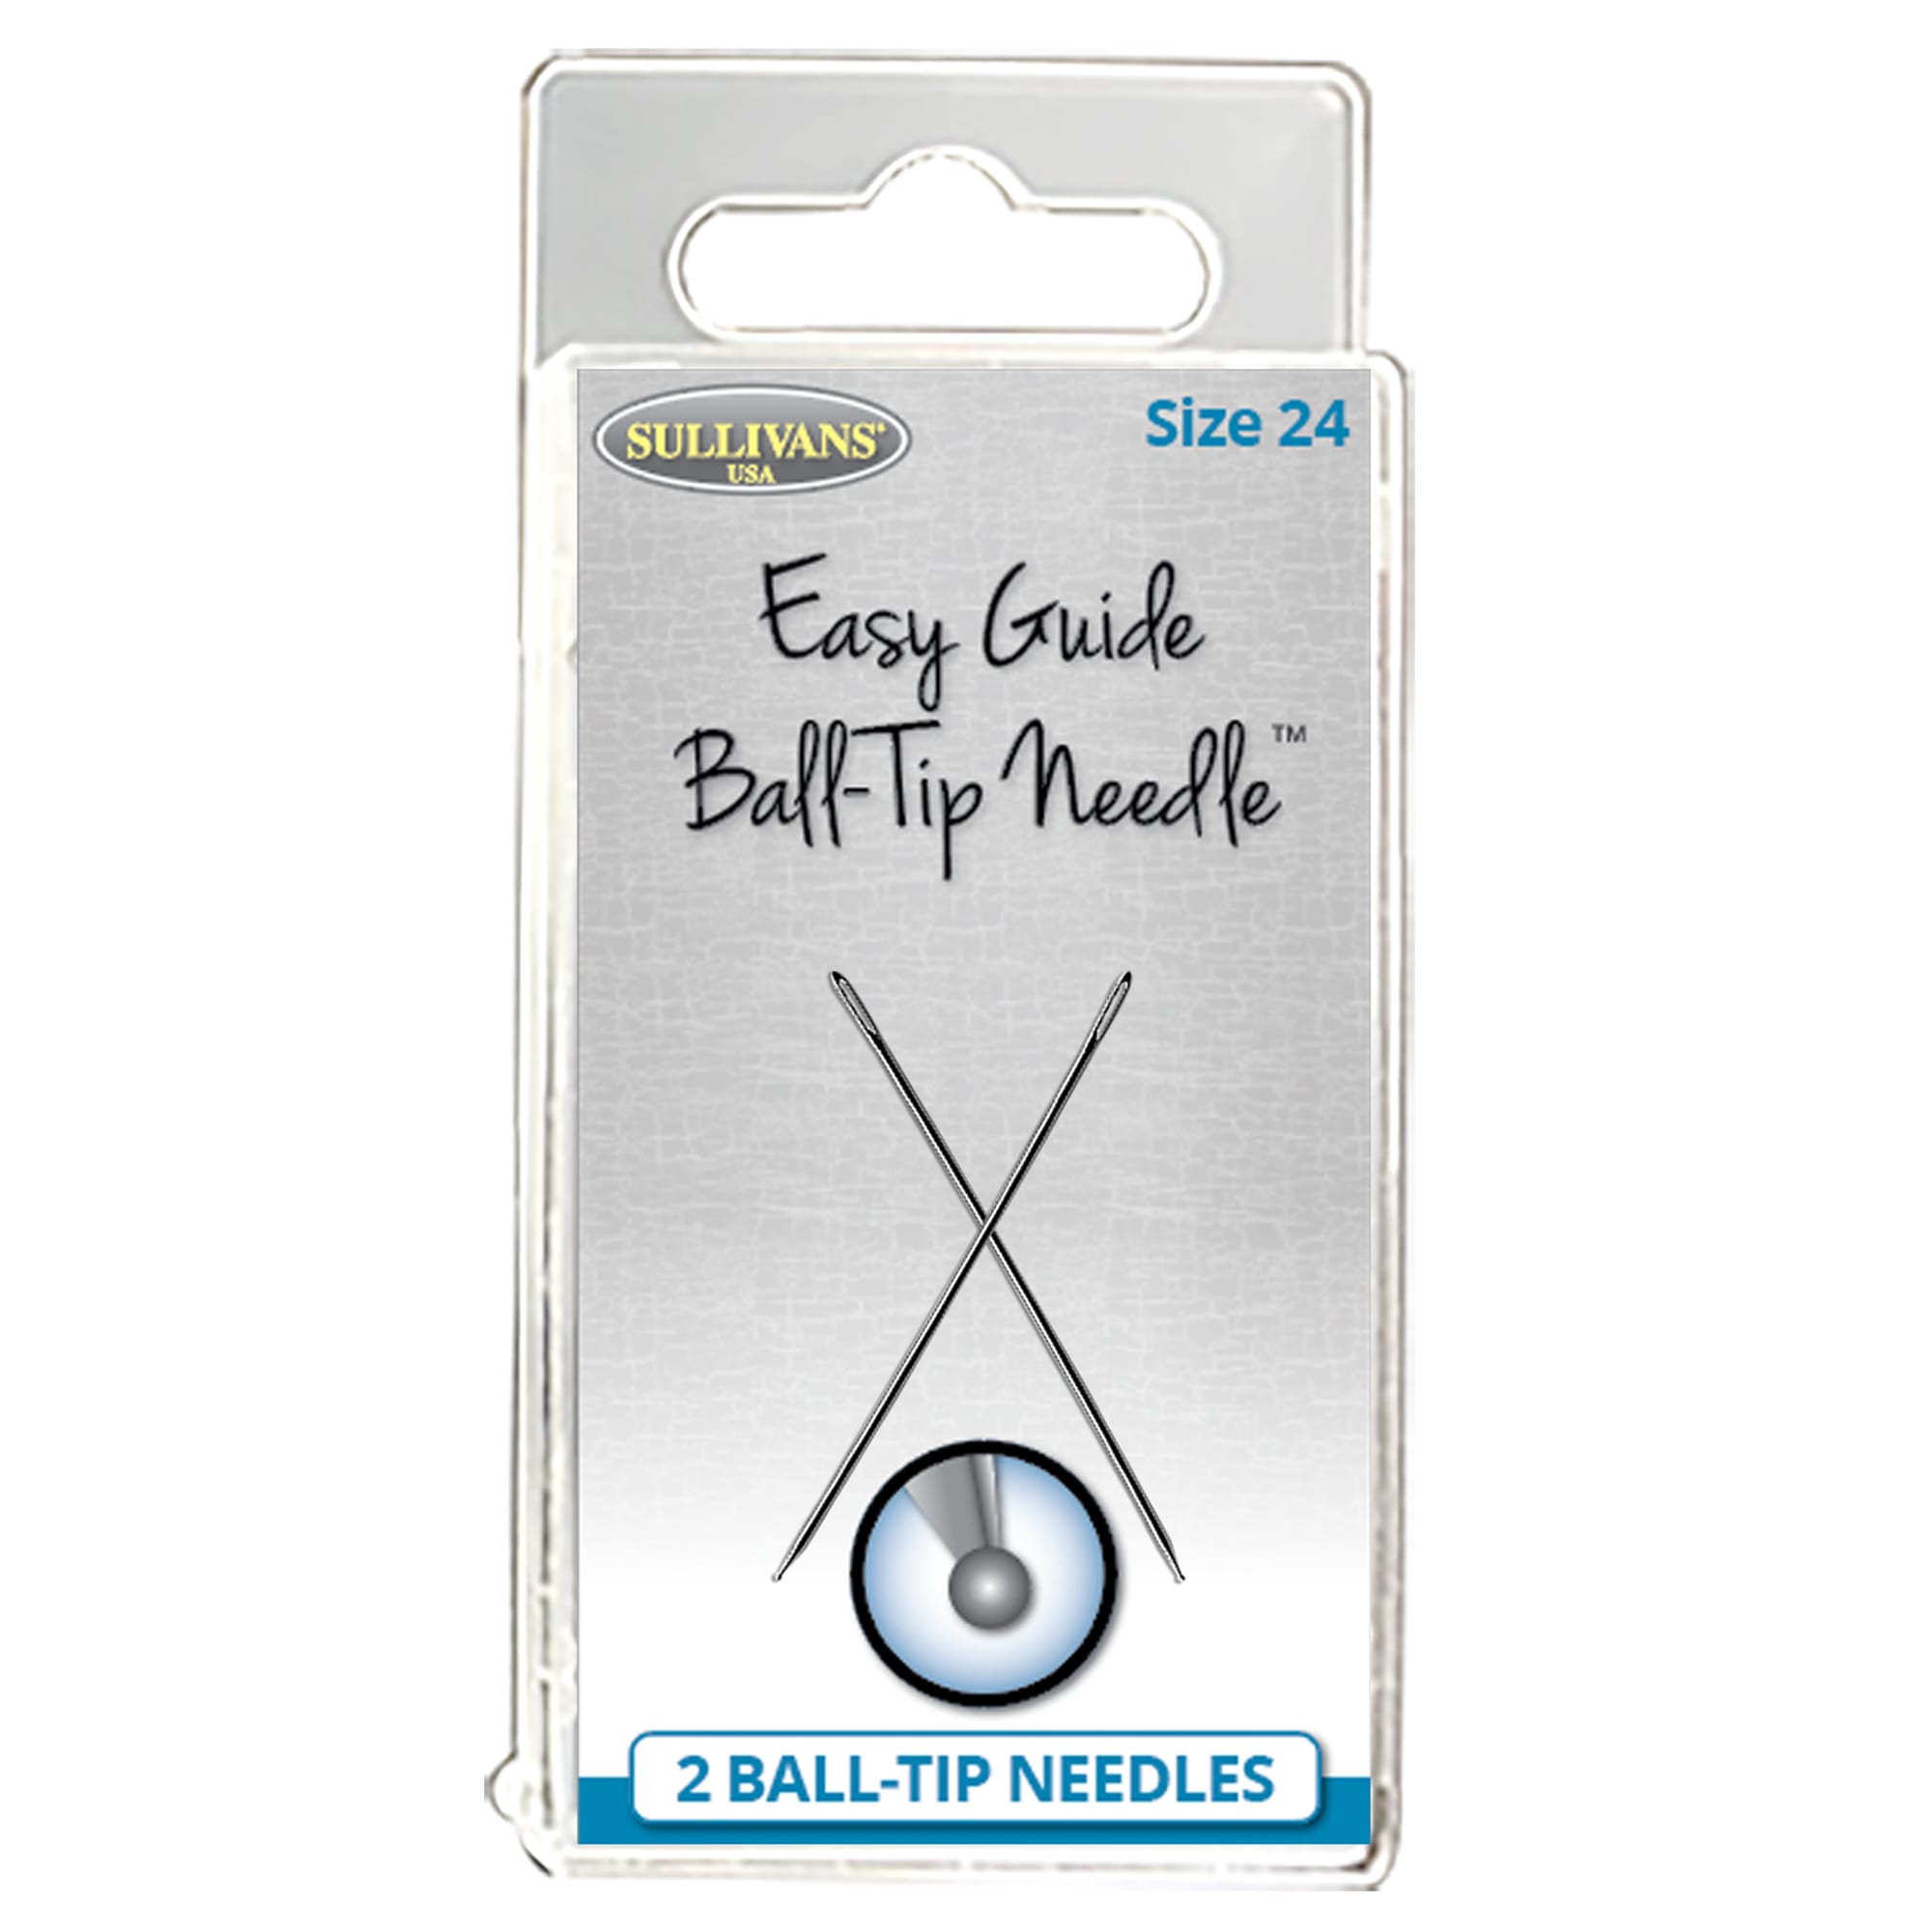 Easy Guide Ball-Tip Needle - Size 24